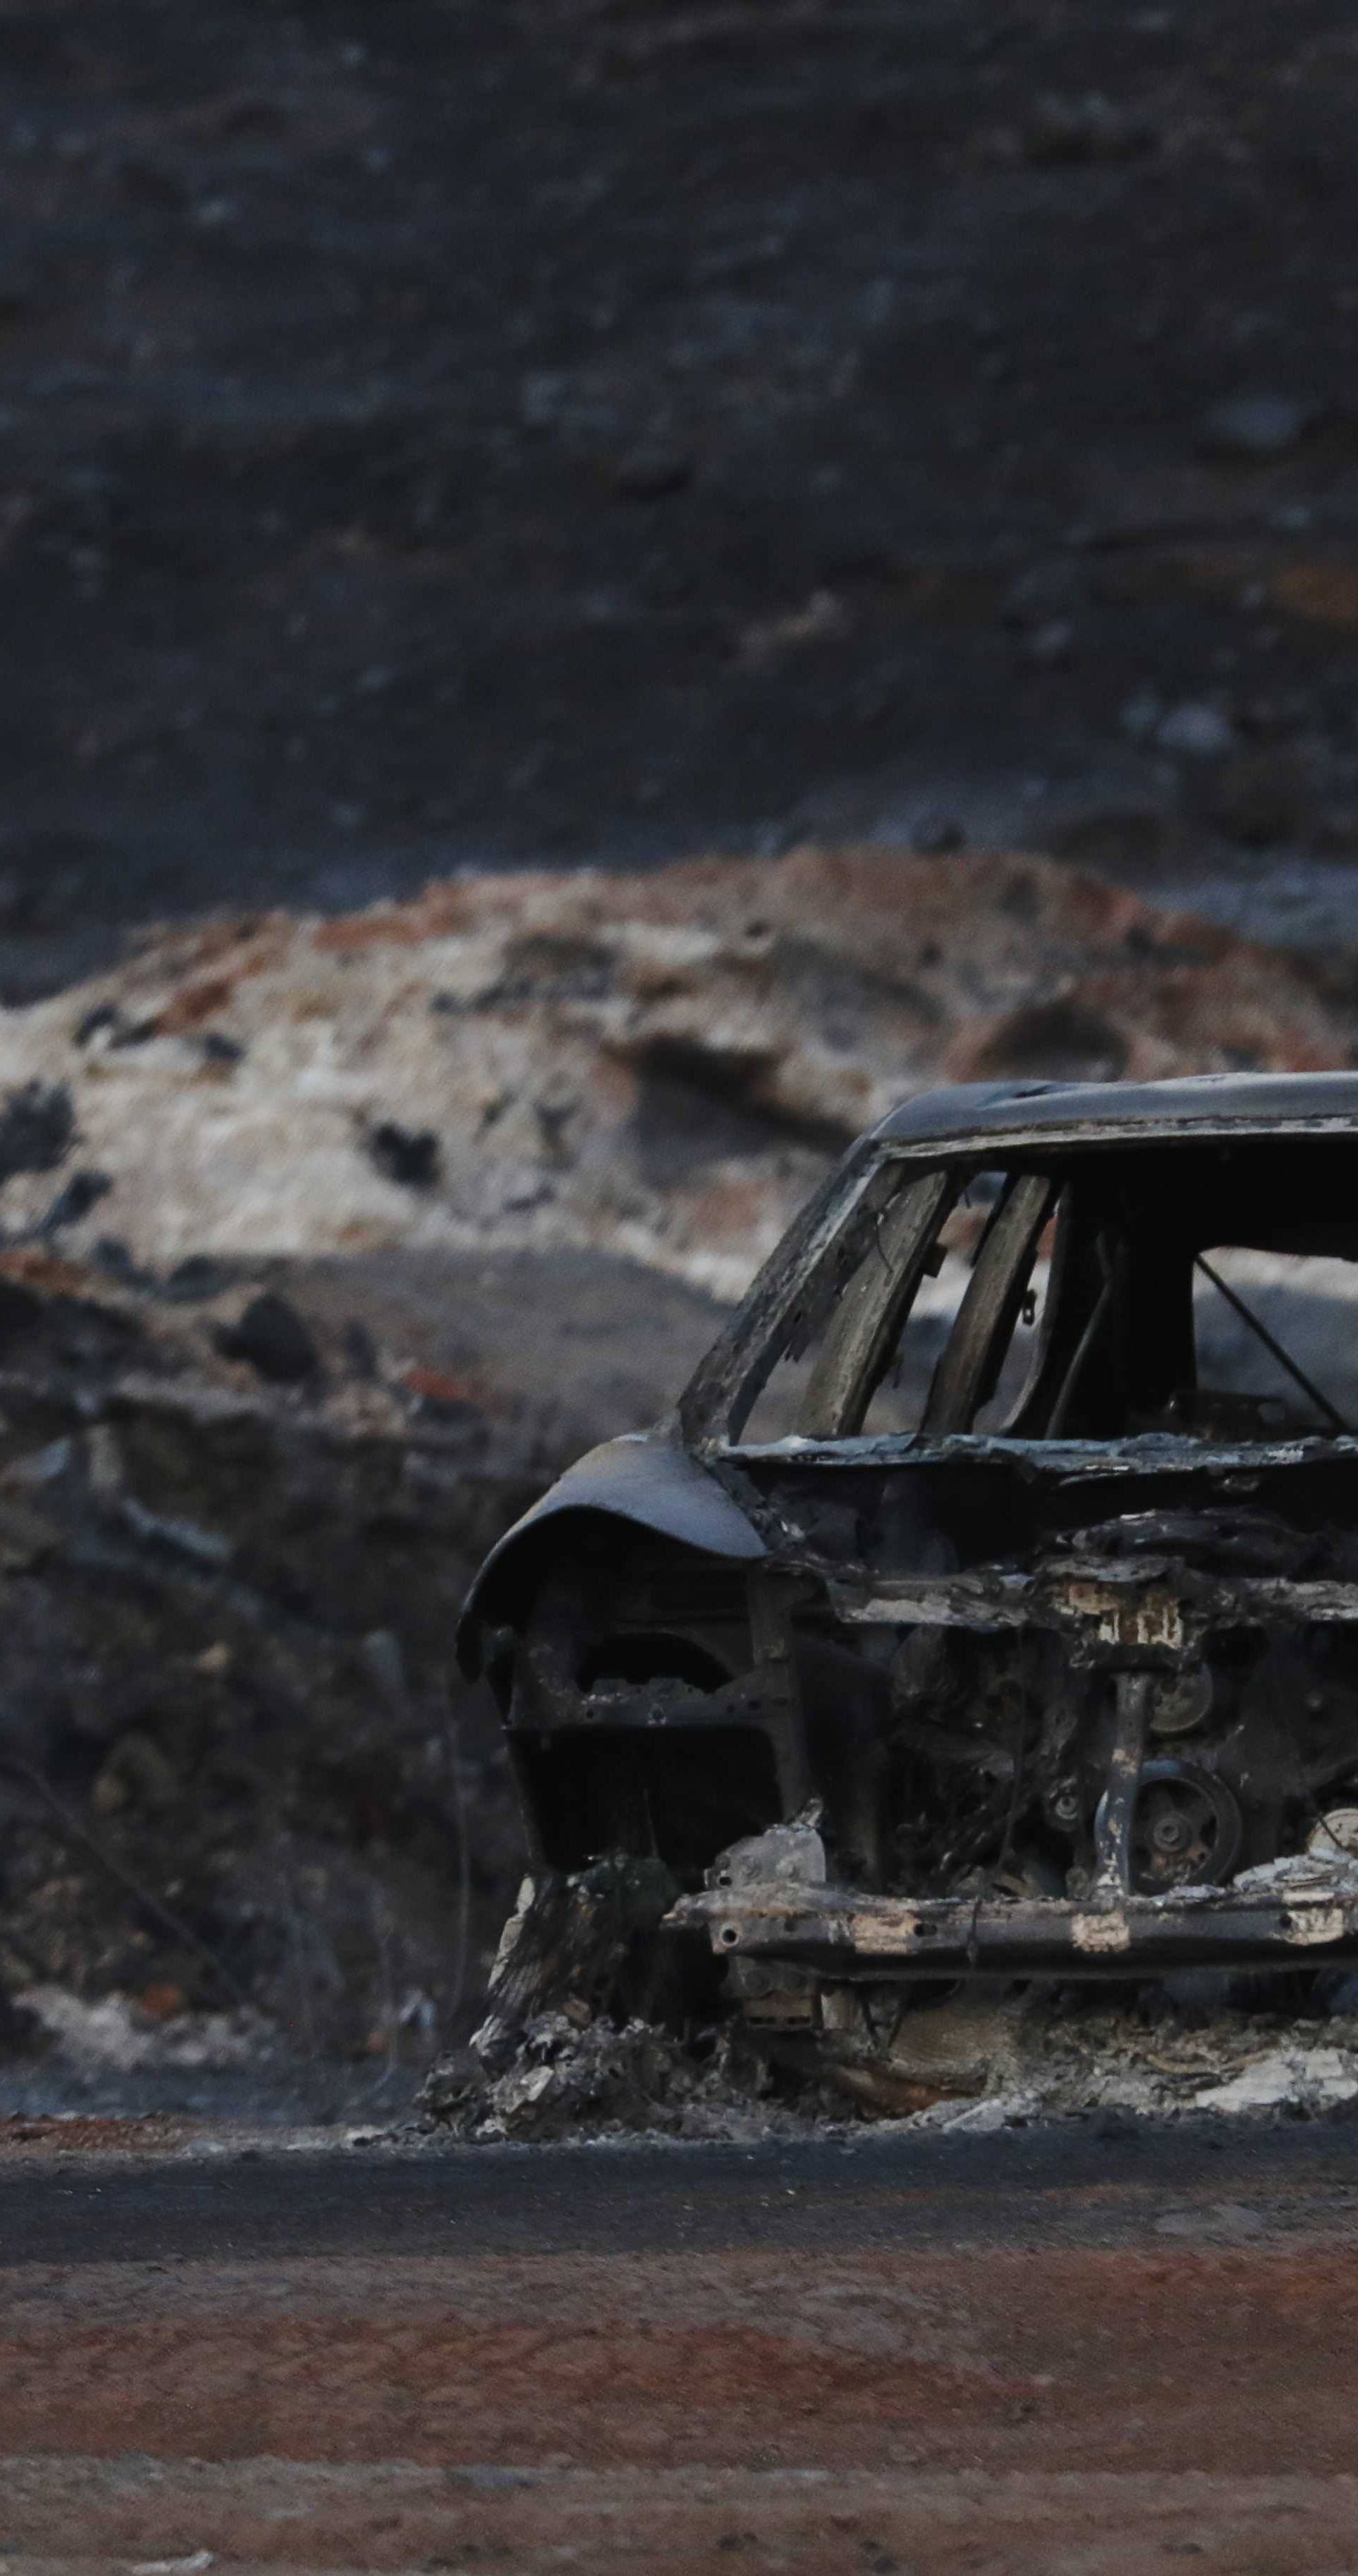 The burnt wreckage of a vehicle is seen along a road as a flames are seen, in the aftermath of the Woolsey fire in Malibu, Southern California